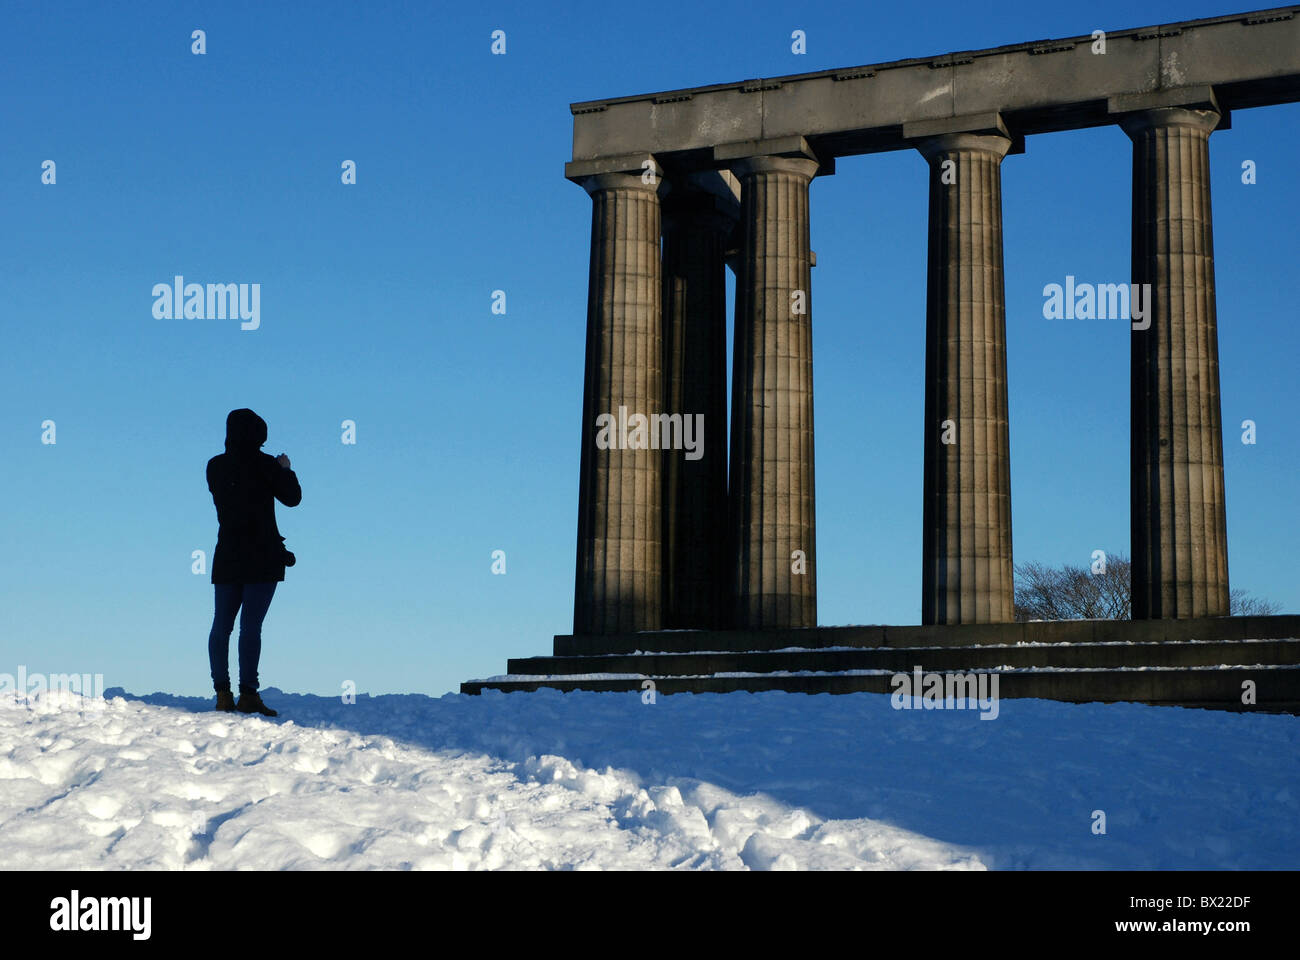 A tourist taking photographs of the National Monument on Calton Hill, Edinburgh, Scotland, UK after a fall of snow. Stock Photo